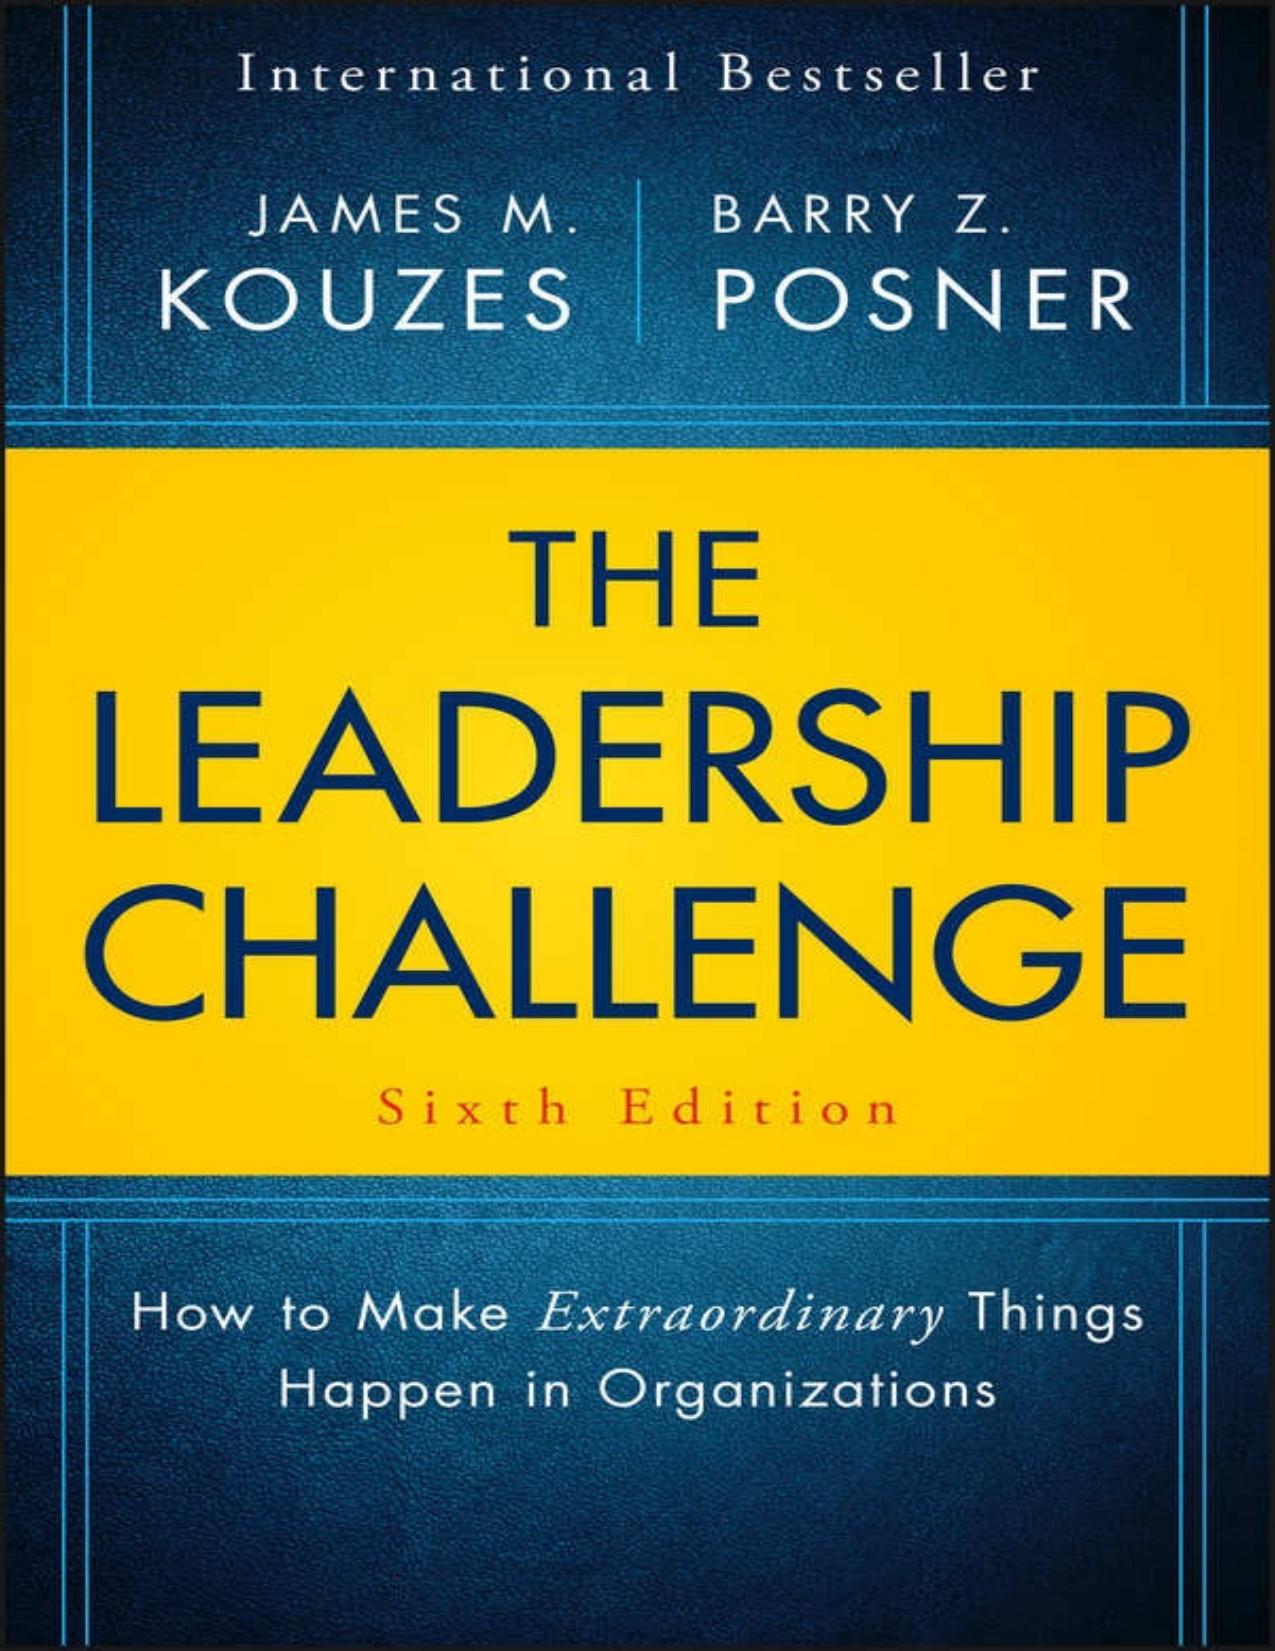 The Leadership Challenge: How to Make Extraordinary Things Happen in Organizations - PDFDrive.com